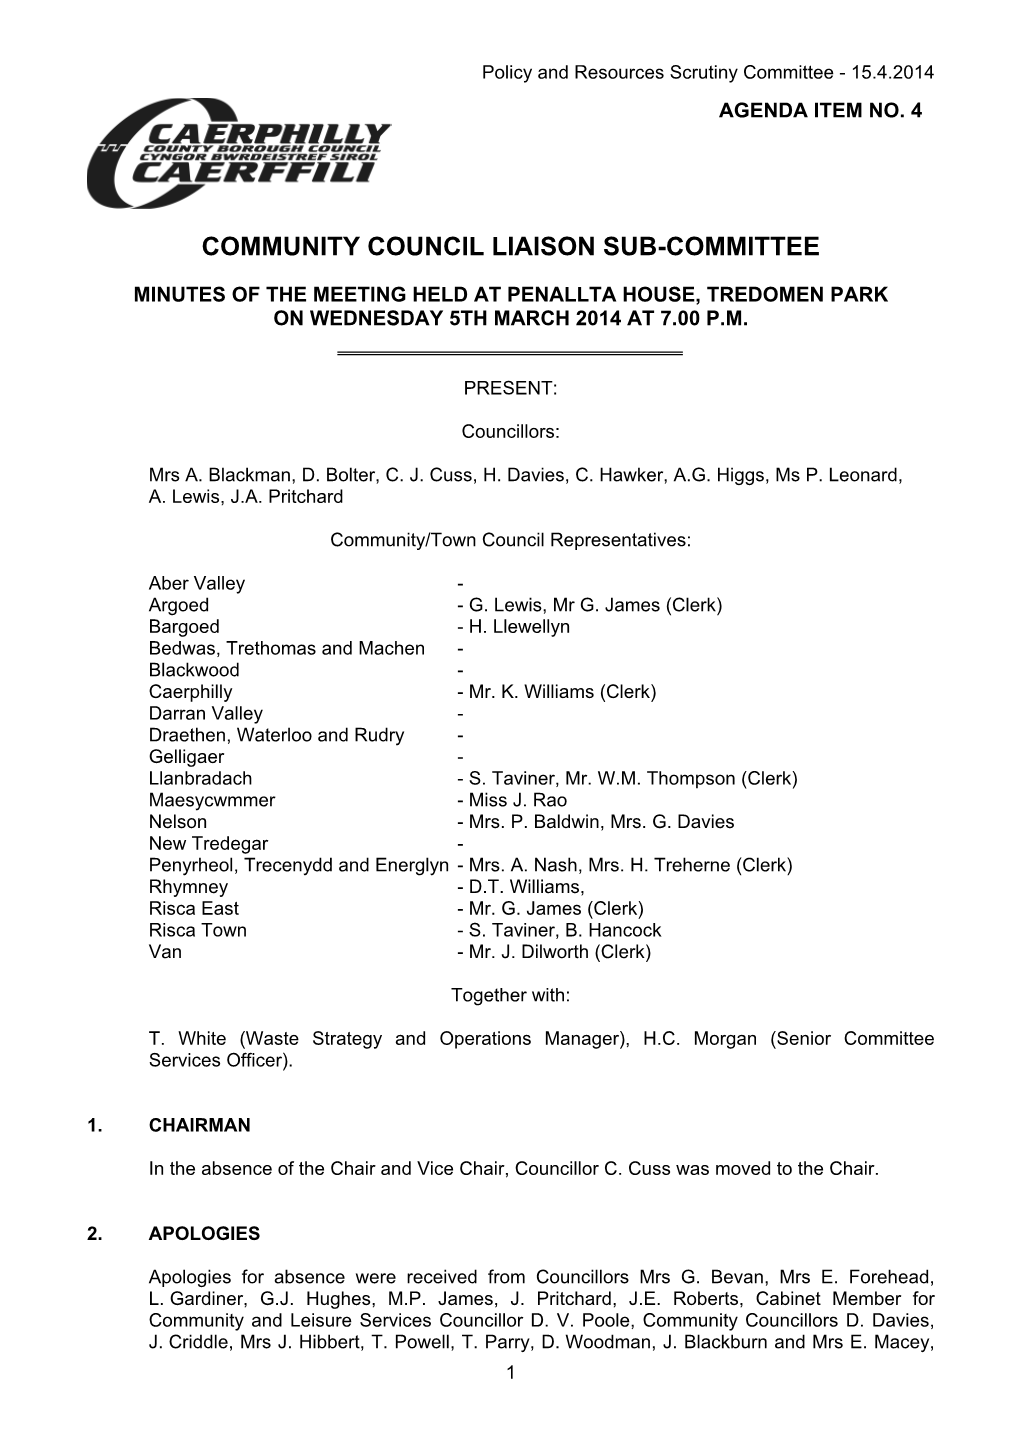 Community Council Liaison Sub-Committee